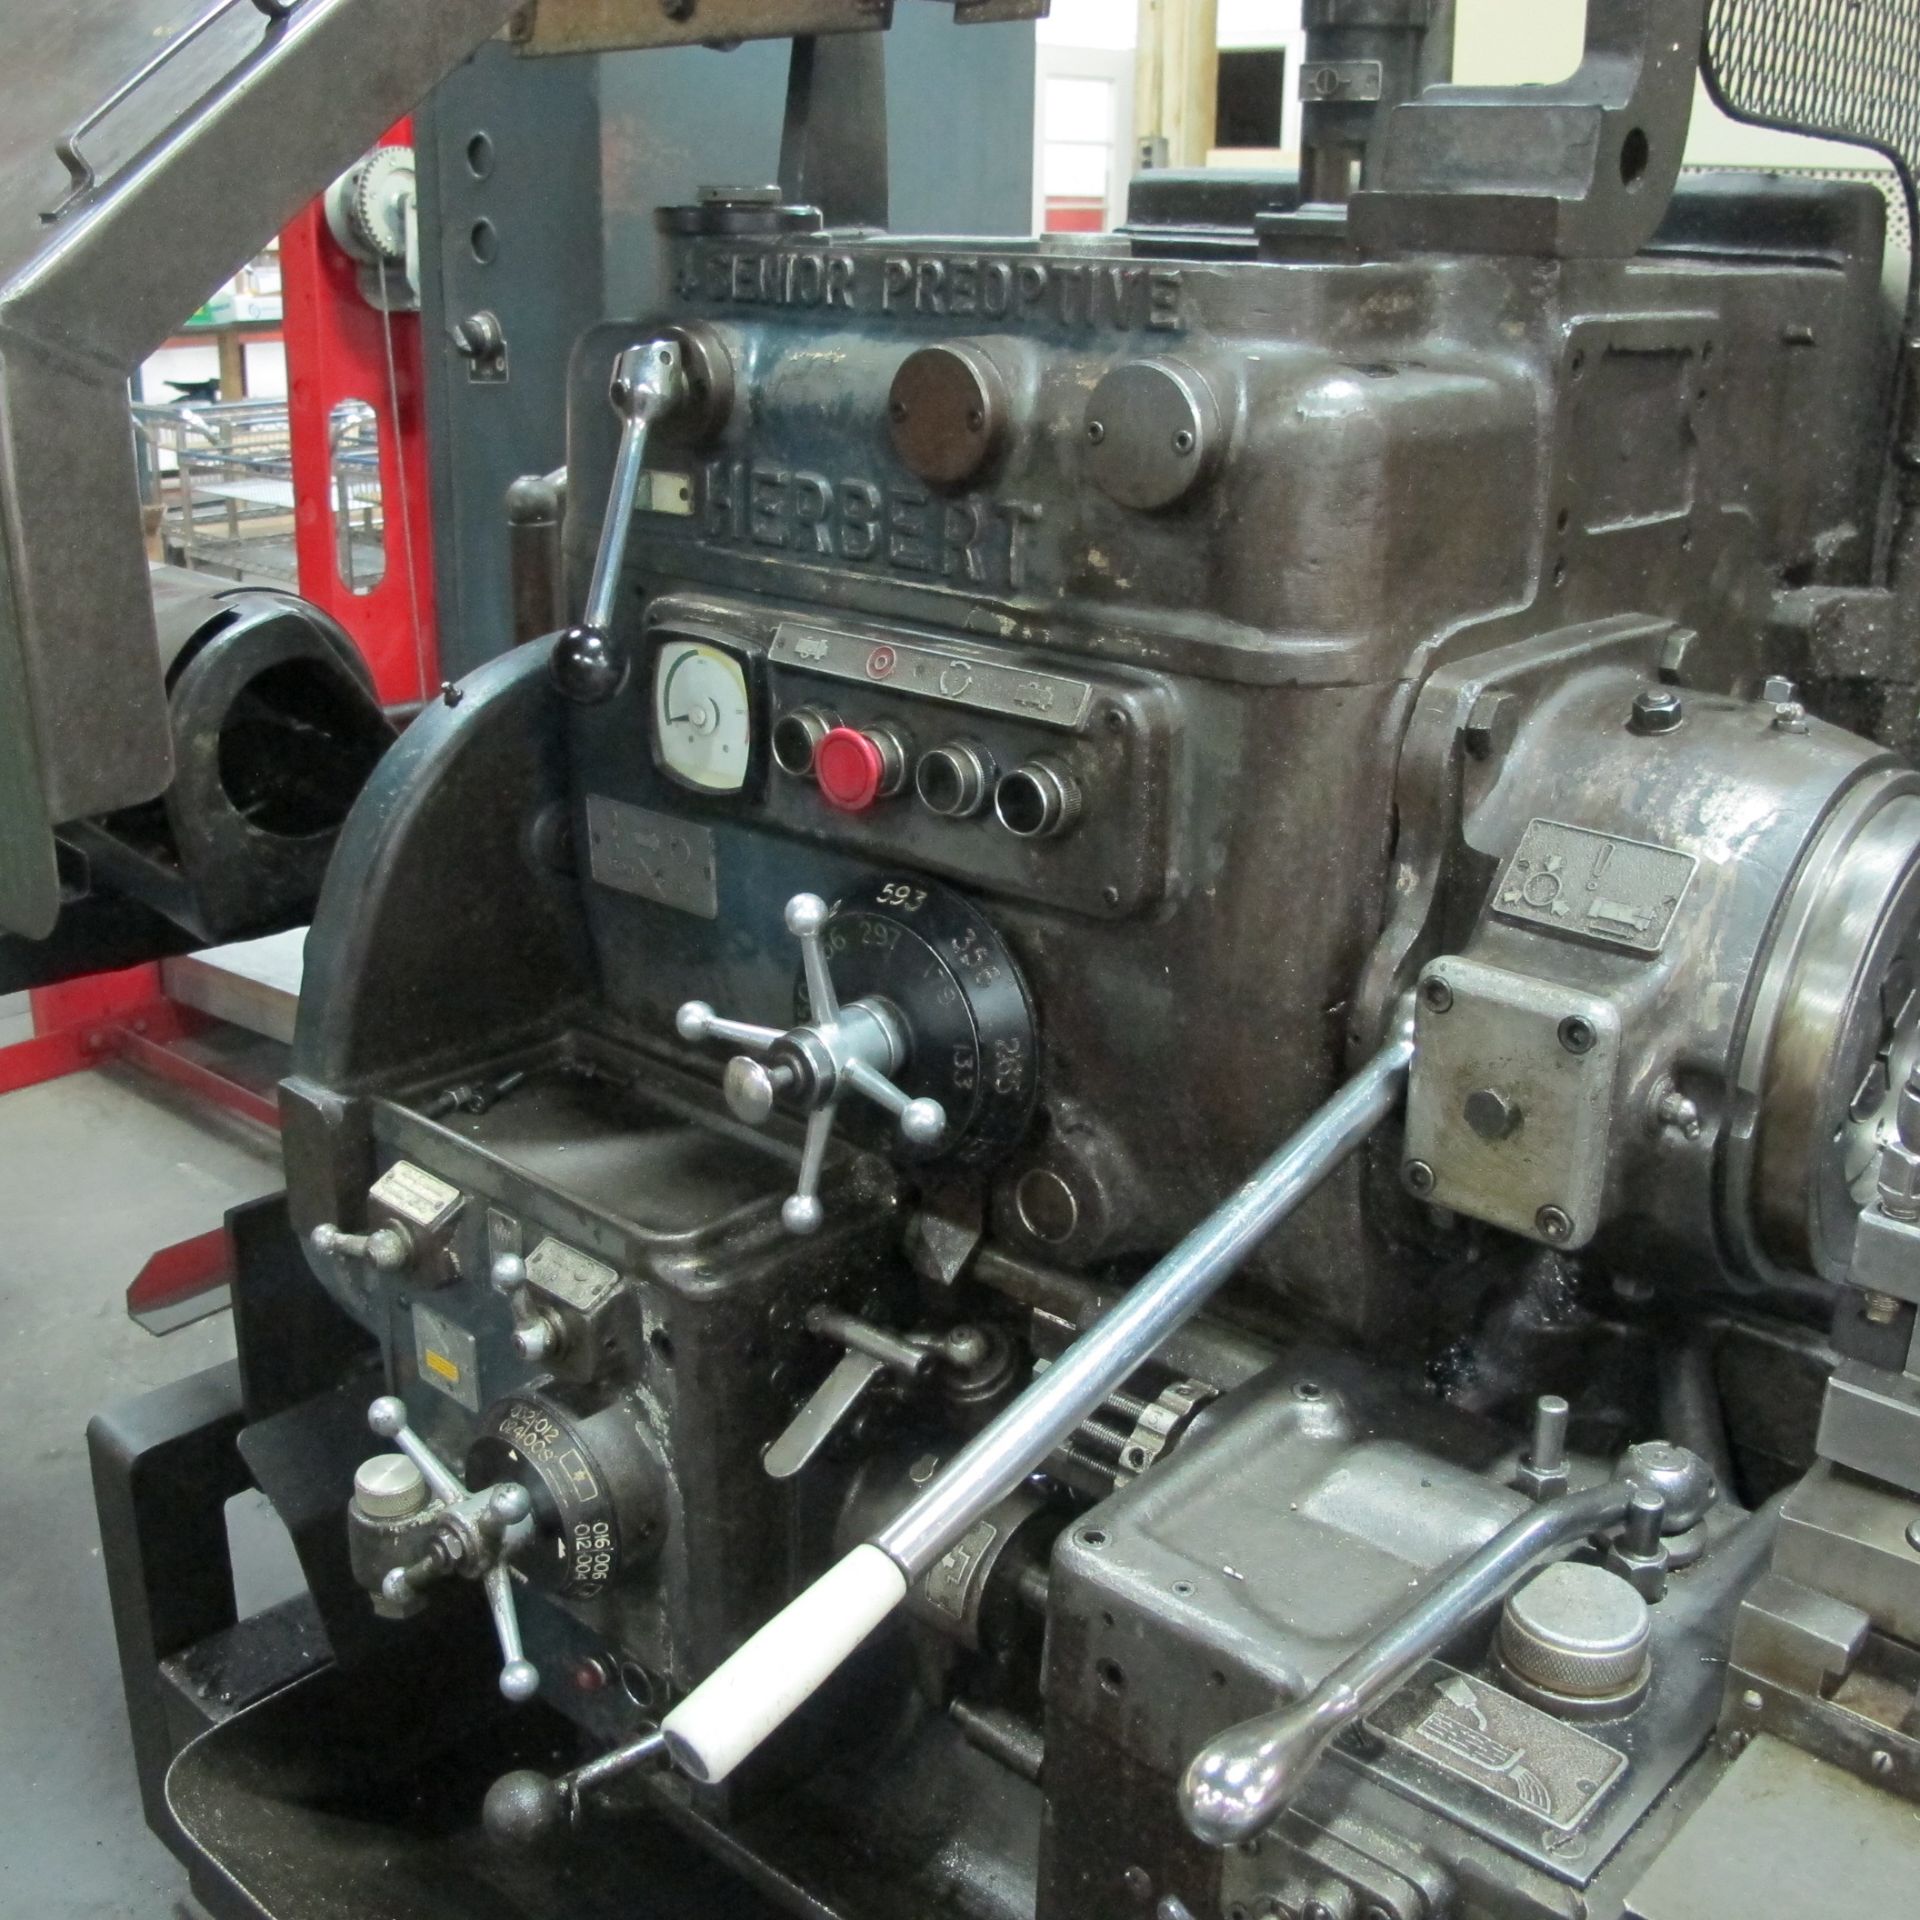 ALBERT HERBERT LATHE, 17" BETWEEN CENTERS, 6 SIDED TURRET W/TOOLING, 7-1/2" l BAR FEEDER, 3" BORE, - Image 5 of 12